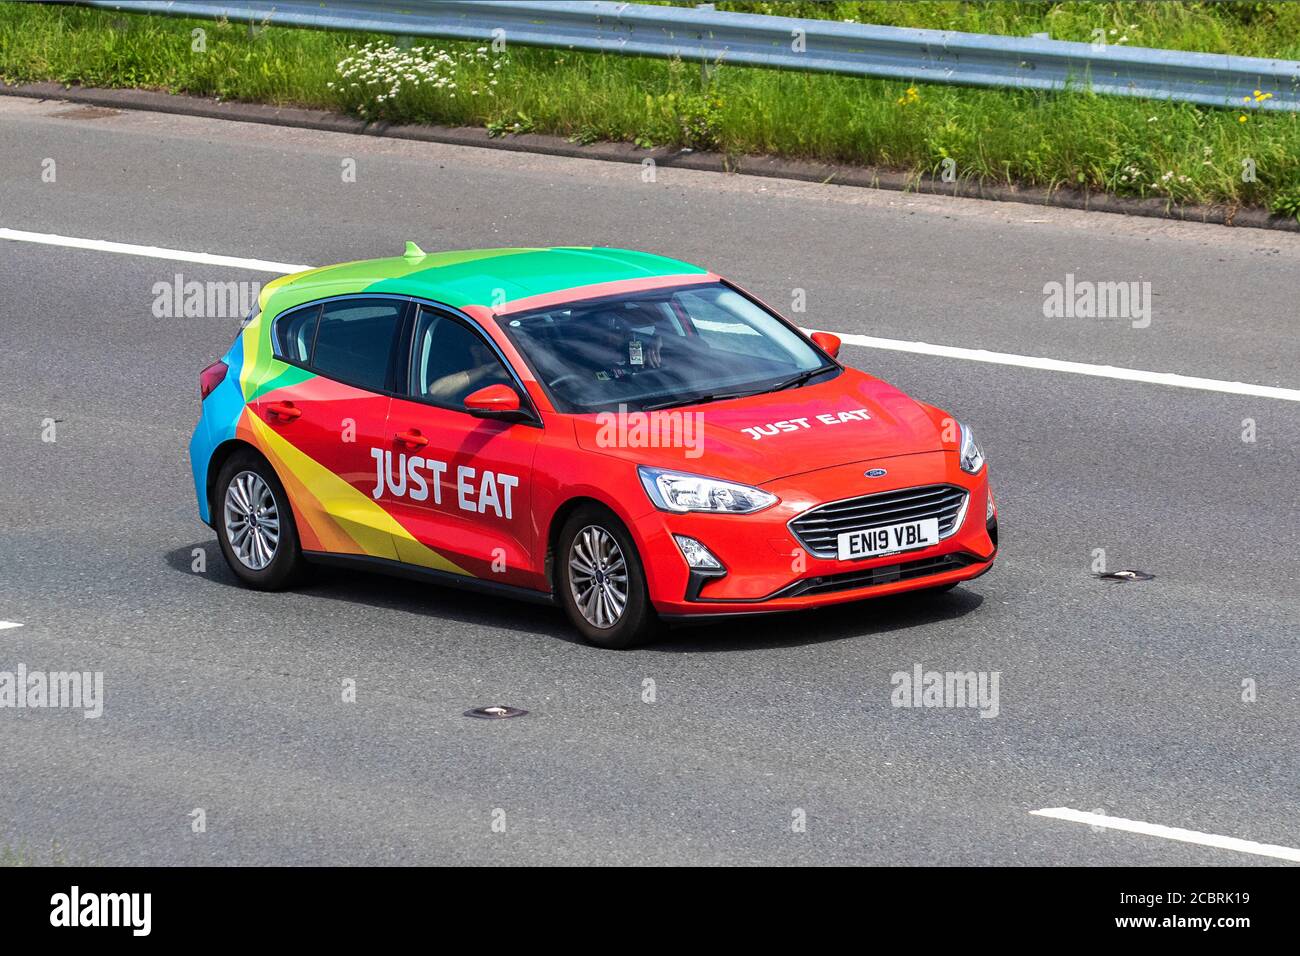 Just Eat takeaway online foods delivery 2019 Ford Focus Titanium TDCI ; Vehicular traffic moving vehicles, commercial vans, food courier on the Just Eat network, takeaway business vehicle, cars driving vehicle on UK roads, motors, motoring on the M6 motorway highway network. Stock Photo